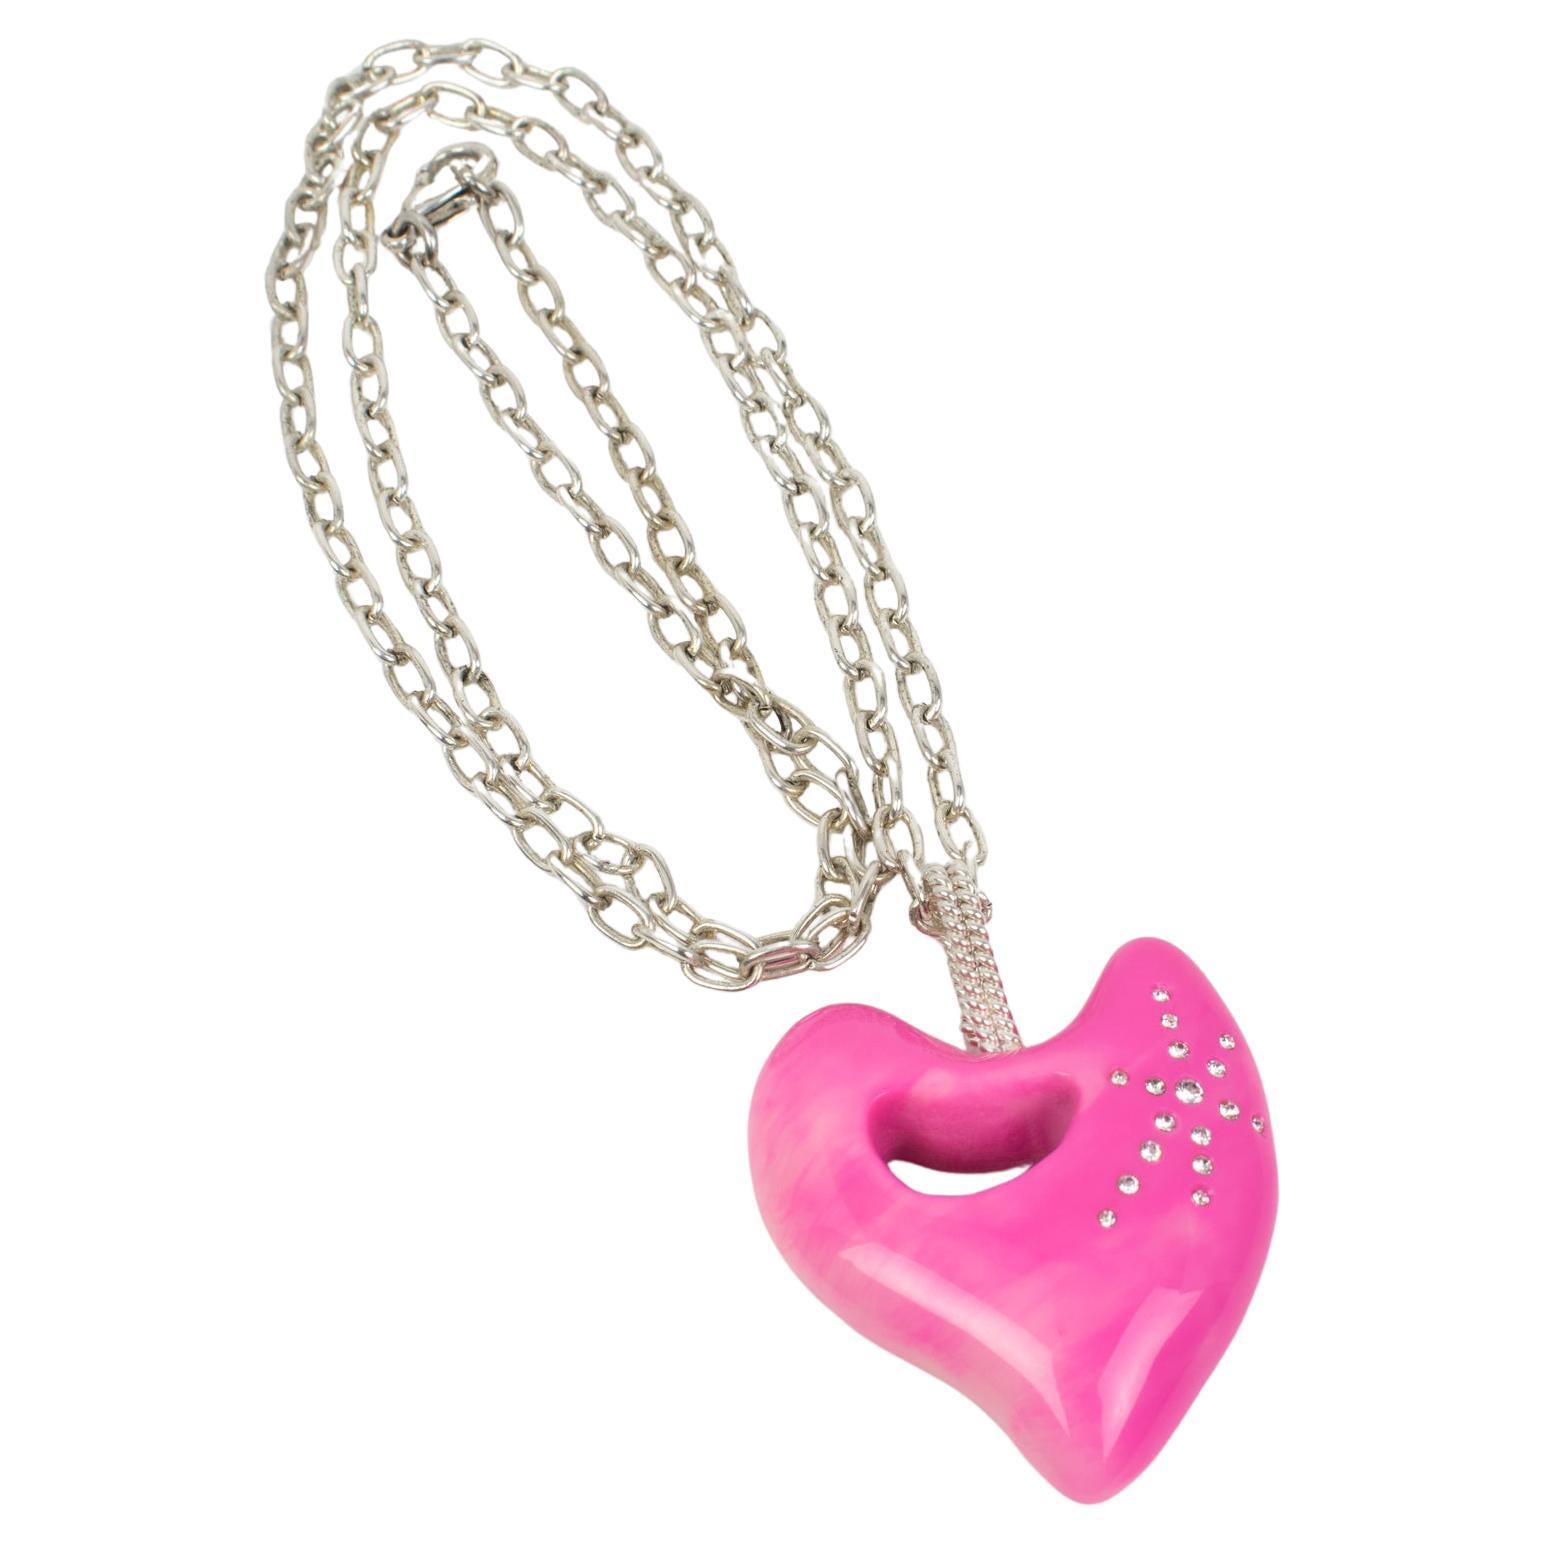 Christian Lacroix Silver Plate Chain Necklace with Hot Pink Resin Heart For Sale